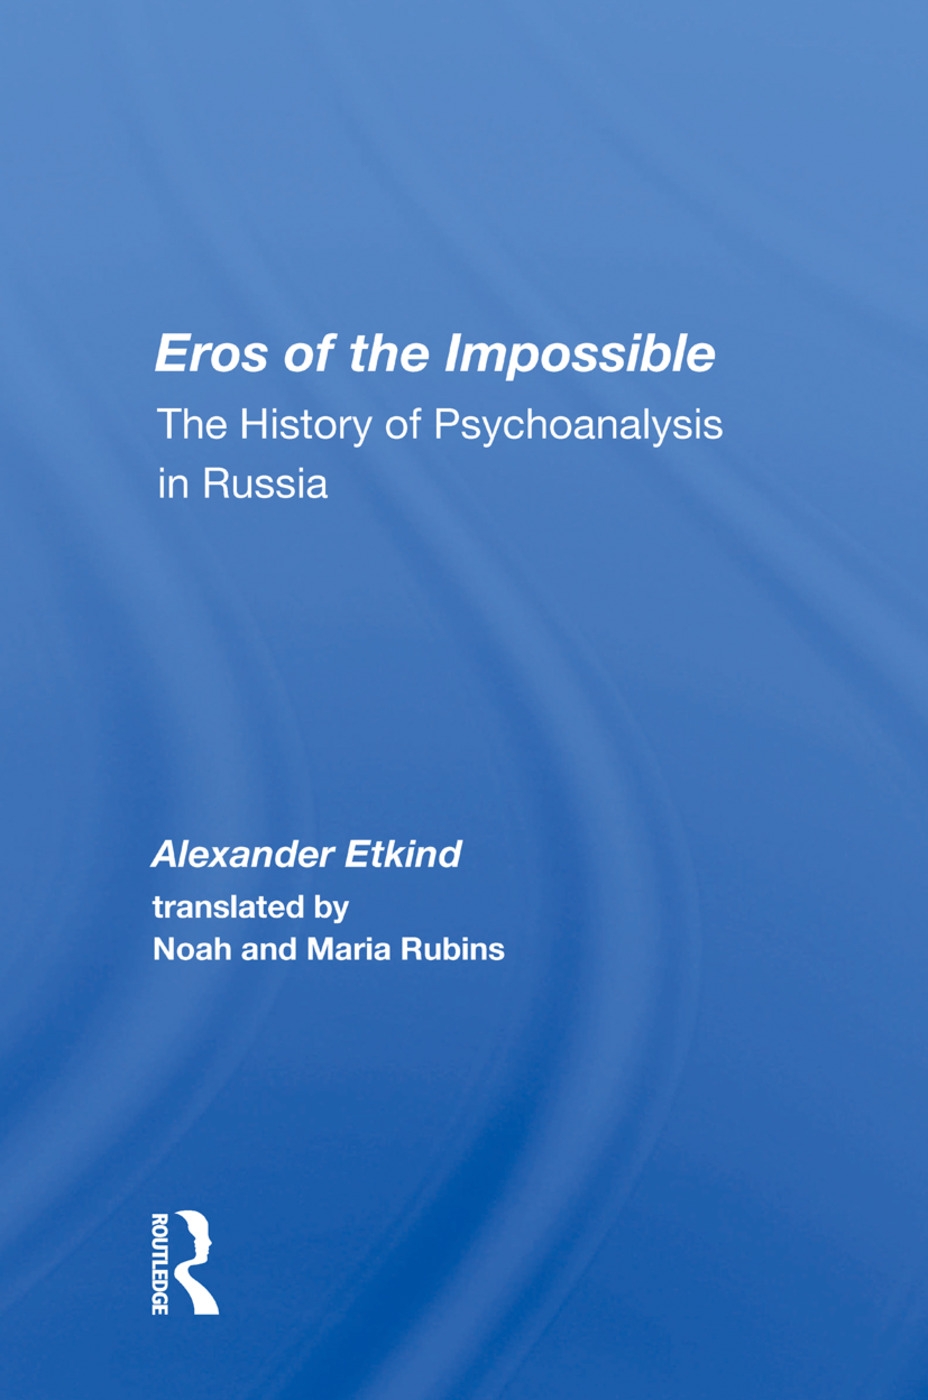 Eros of the Impossible: The History of Psychoanalysis in Russia